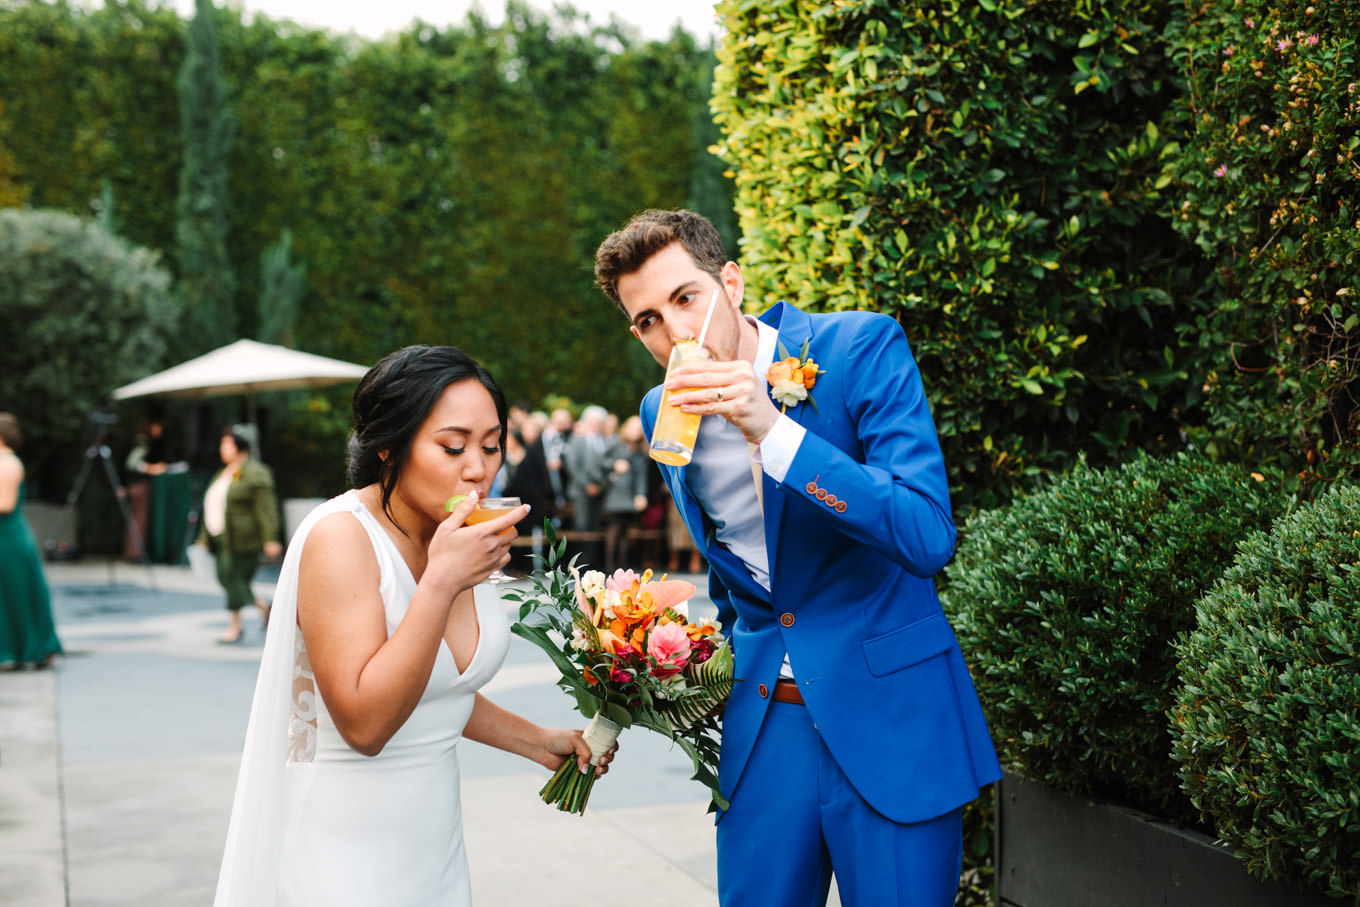 Bride and groom drinking cocktails after wedding ceremony | TV inspired wedding at The Fig House Los Angeles | Published on The Knot | Fresh and colorful photography for fun-loving couples in Southern California | #losangeleswedding #TVwedding #colorfulwedding #theknot   Source: Mary Costa Photography | Los Angeles wedding photographer